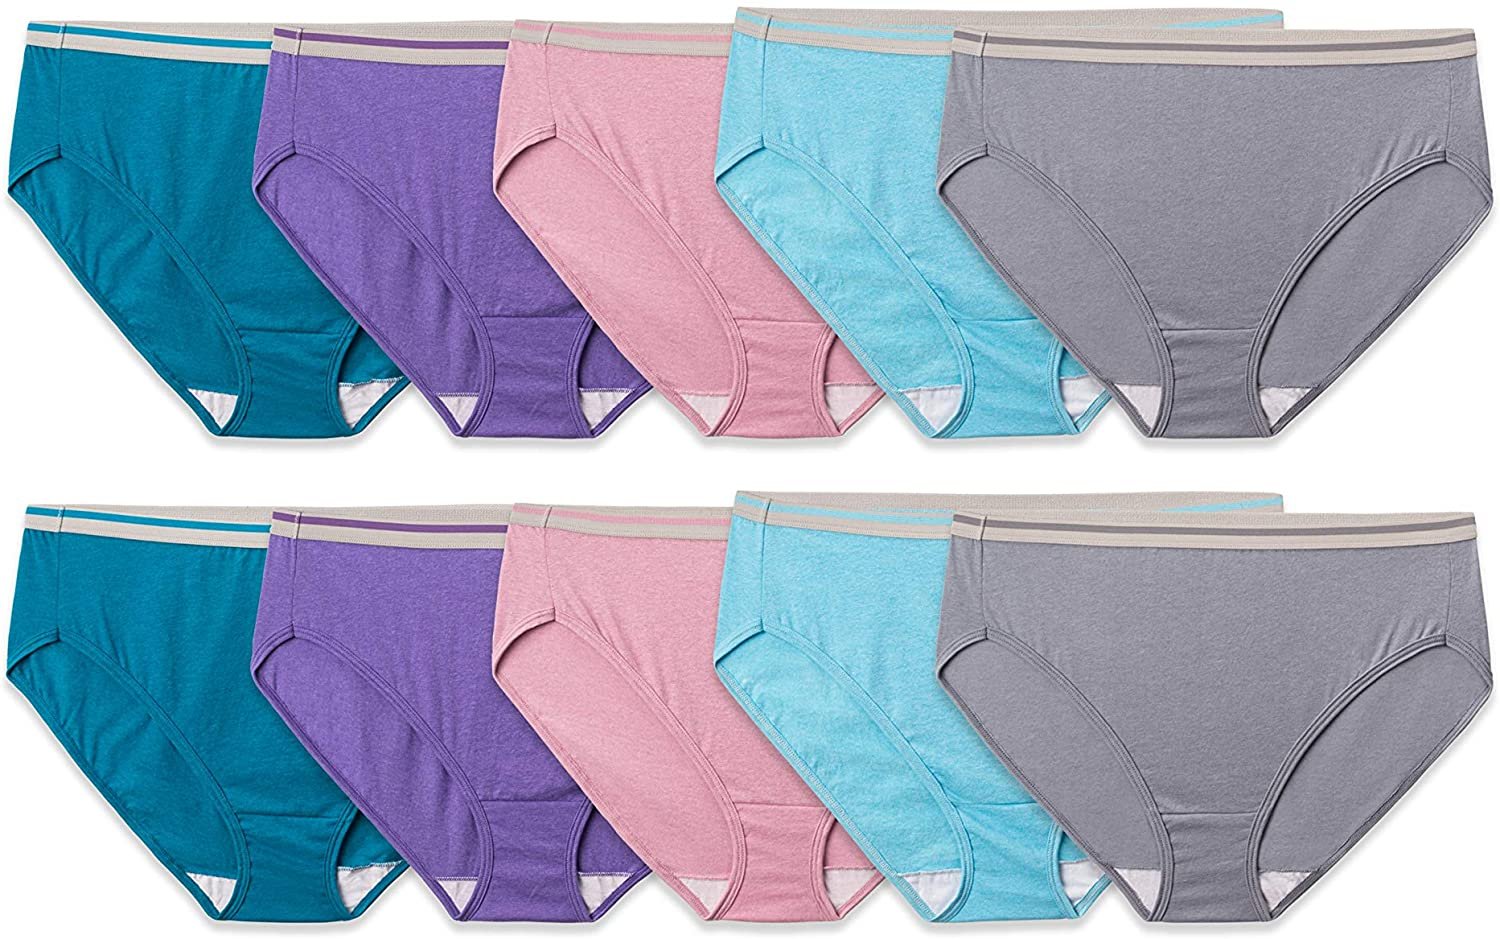  Fruit Of The Loom Womens Tag Free Cotton Brief Panties